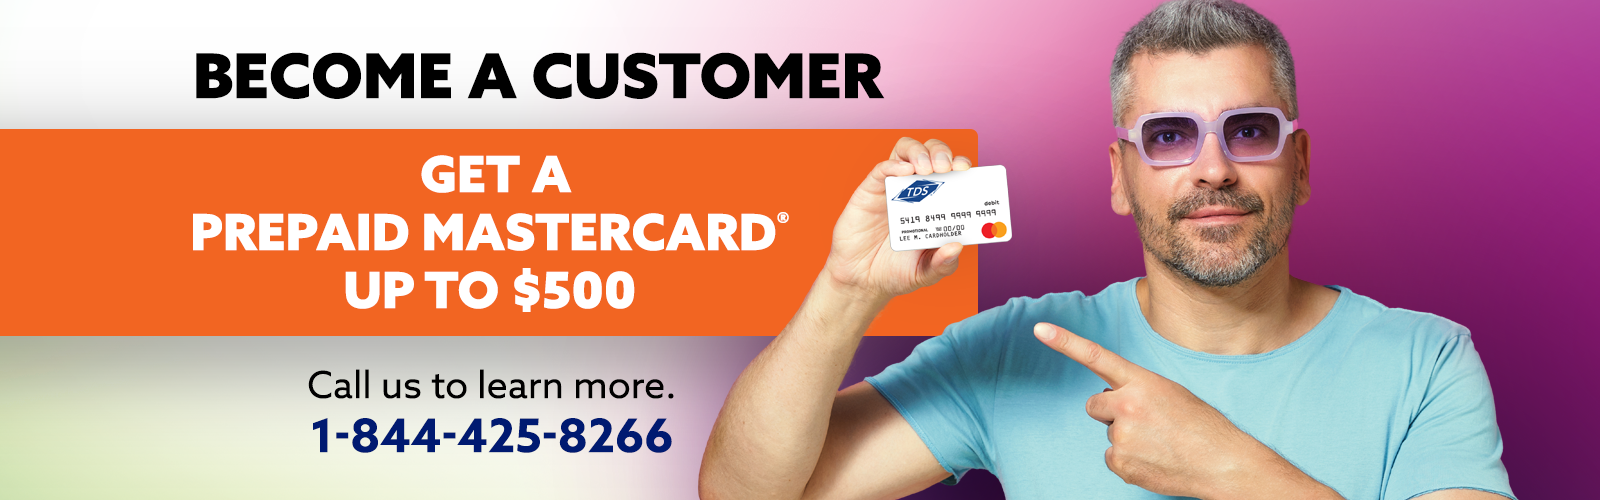 Become a customer and get a prepaid Mastercard up to $500. Call 1-844-425-8266 to learn more.